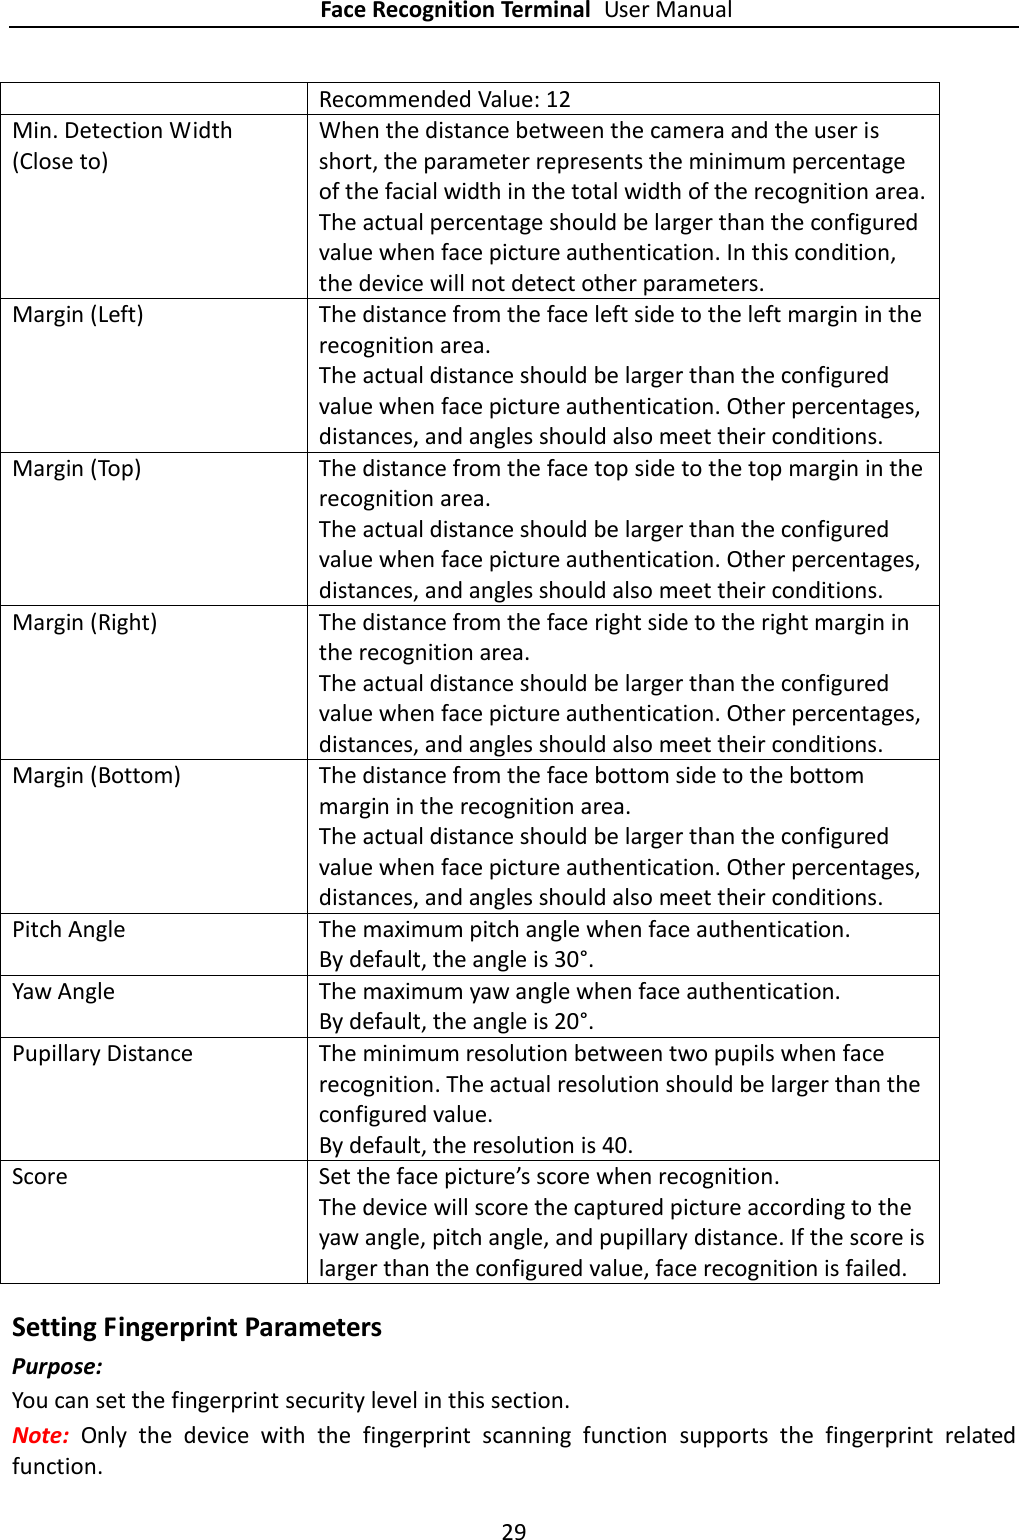 Page 29 of Hangzhou Hikvision Digital Technology K1T604 Face Recognition Terminal User Manual 